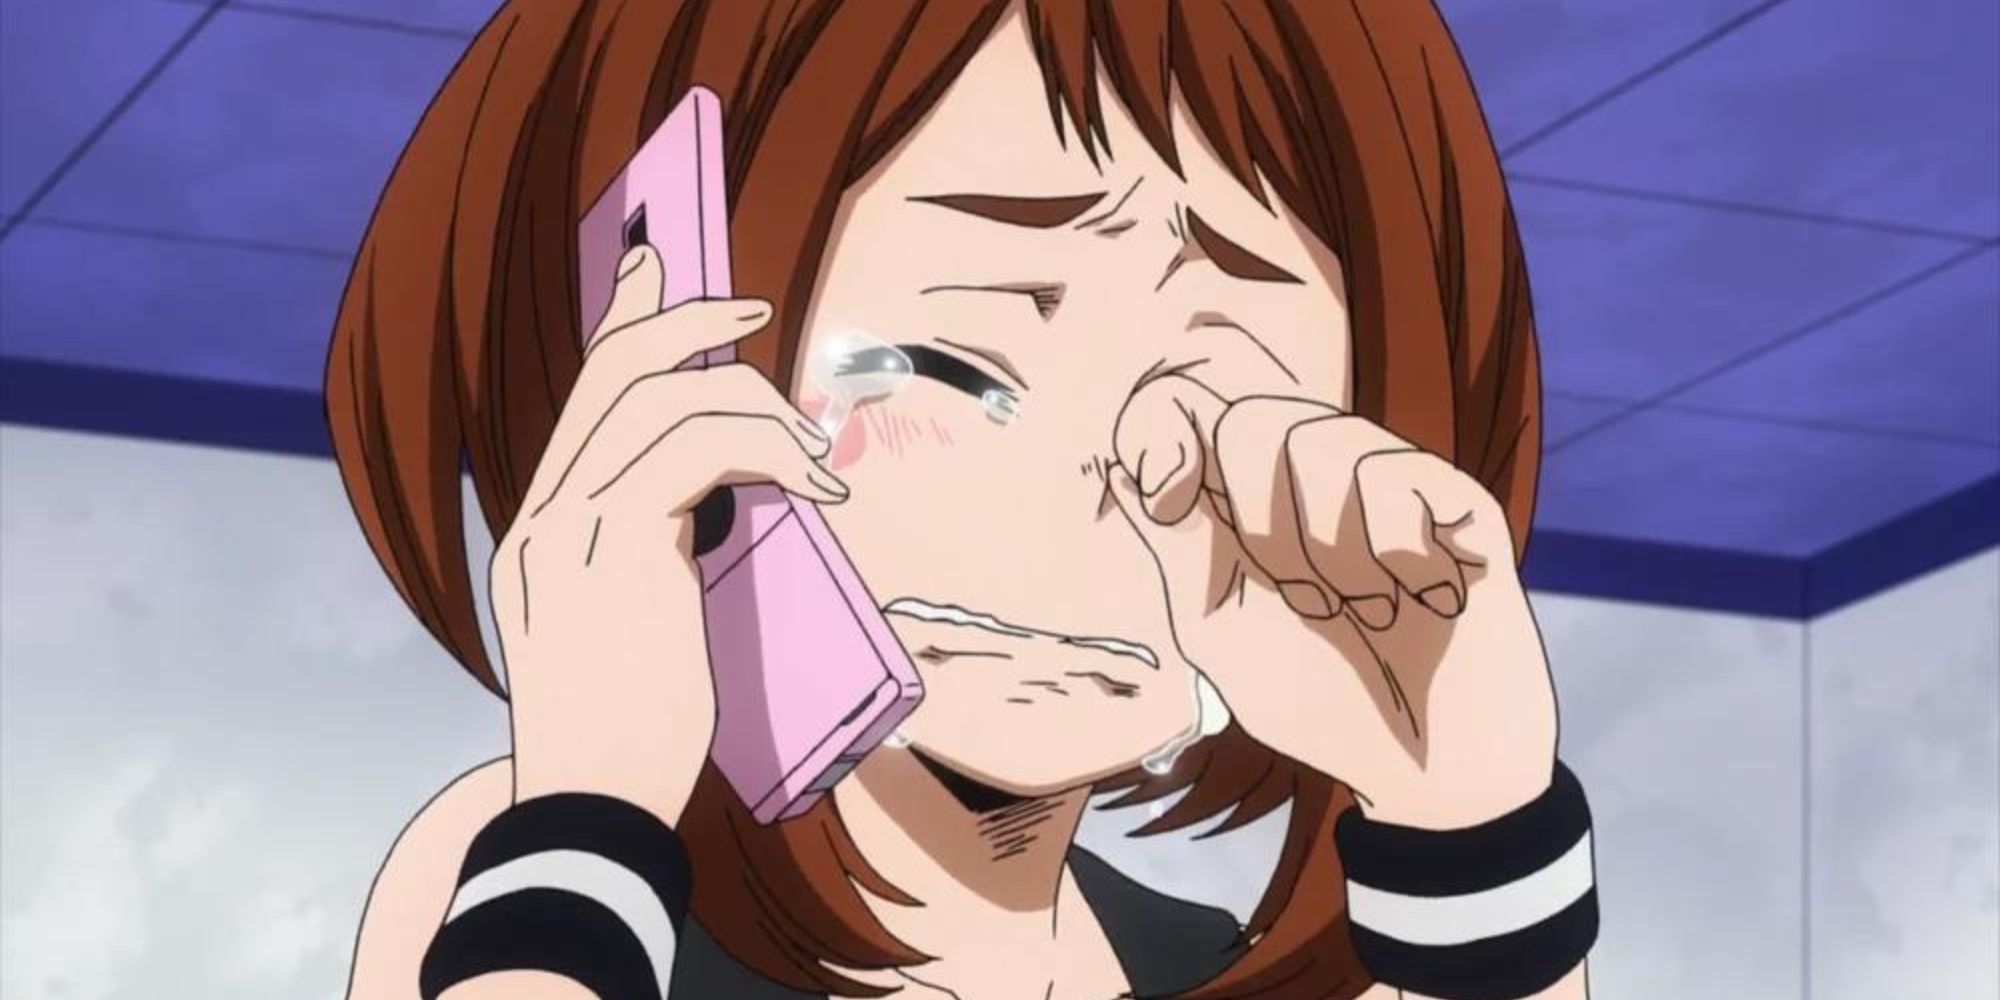 Ochaco cries after her father tells her she's proud.